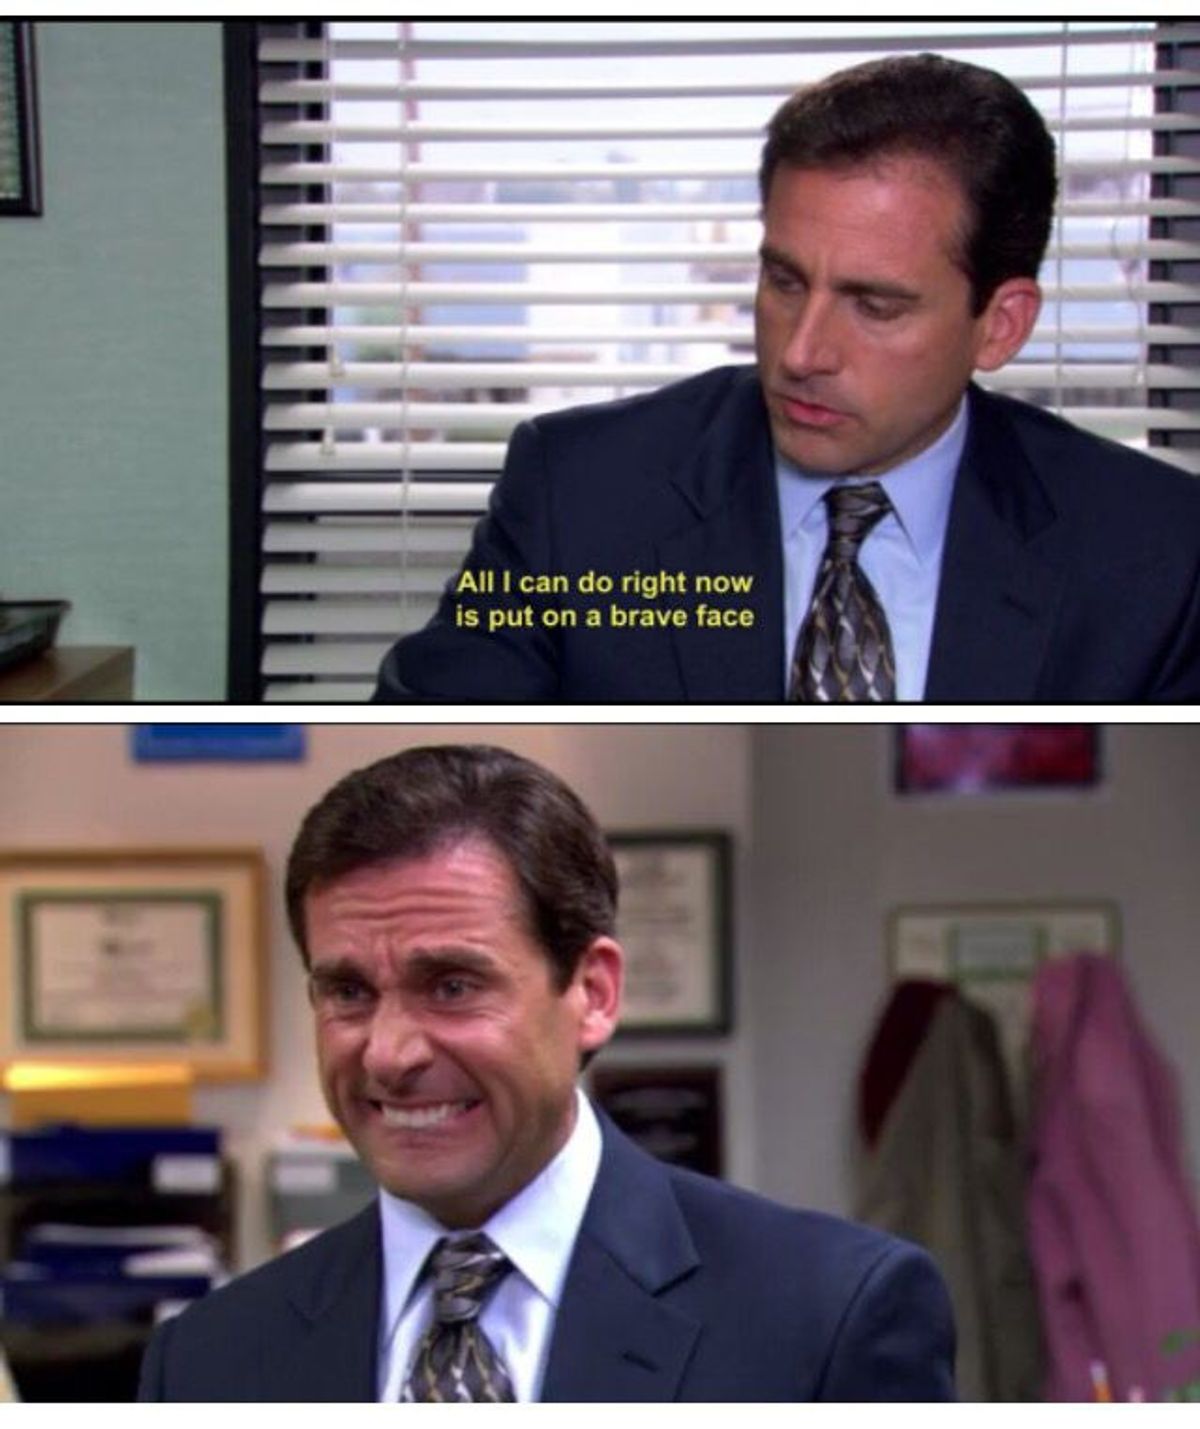 Post Finals Week, As Told By 'The Office'